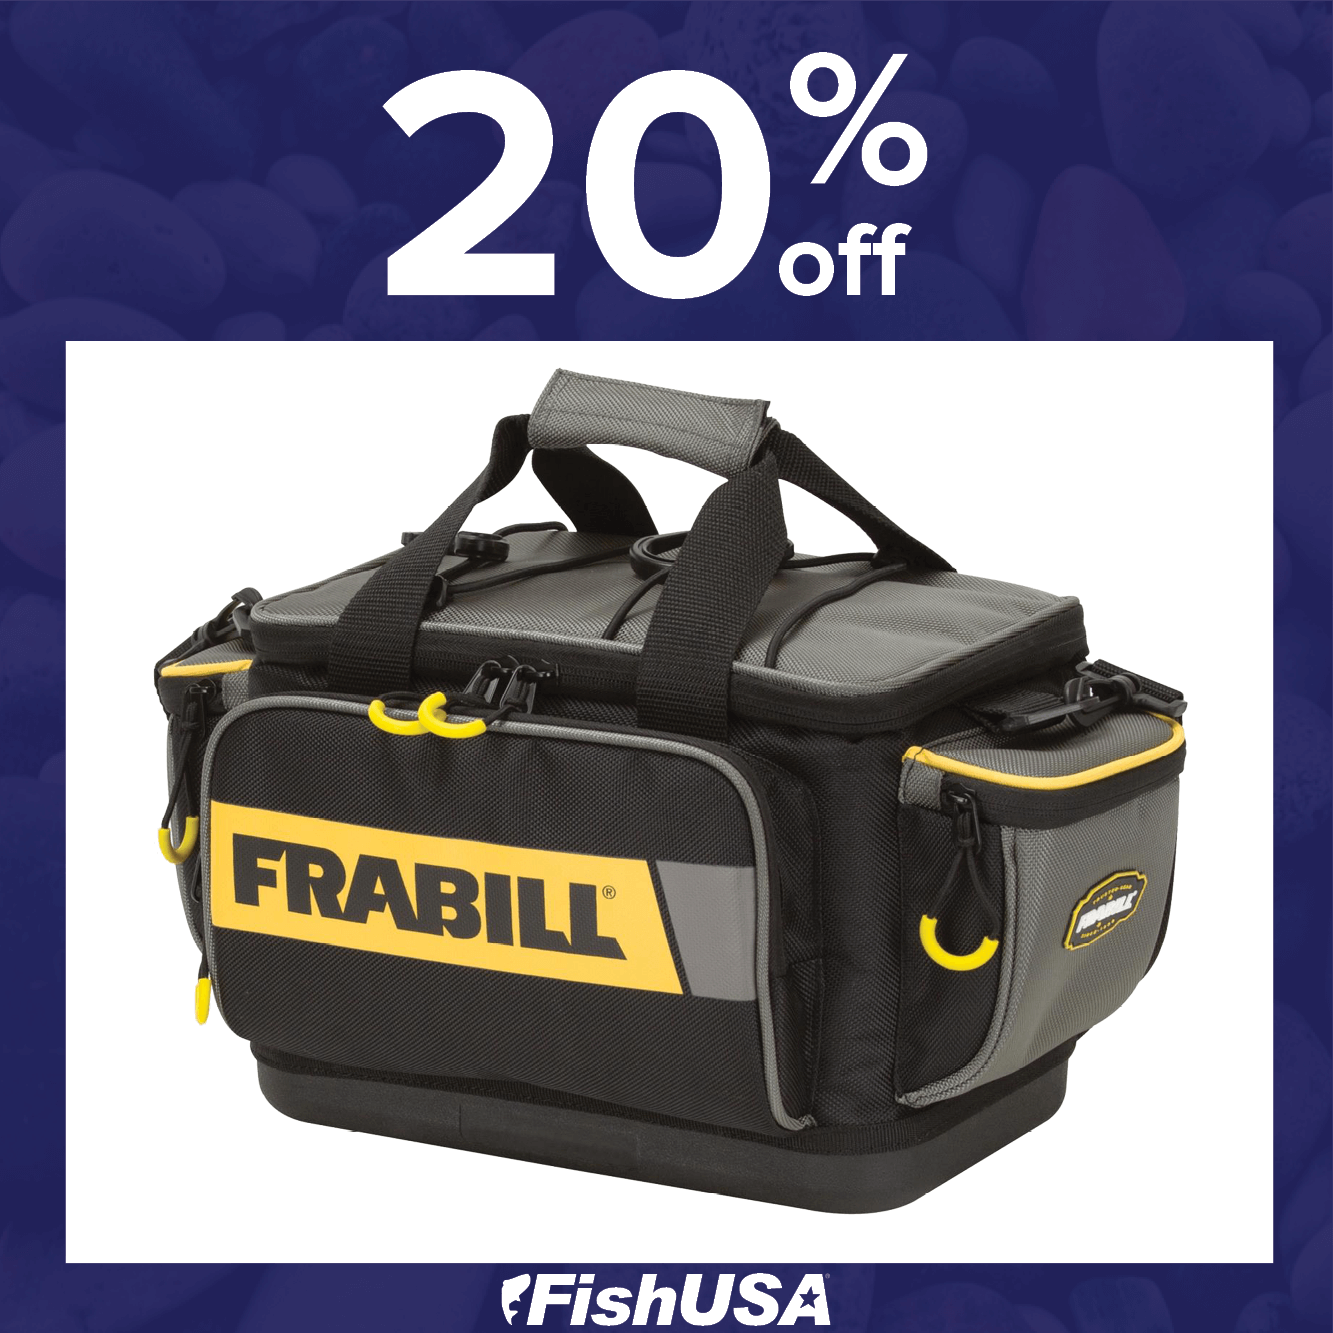 20% off the Frabill Soft Tackle Bag